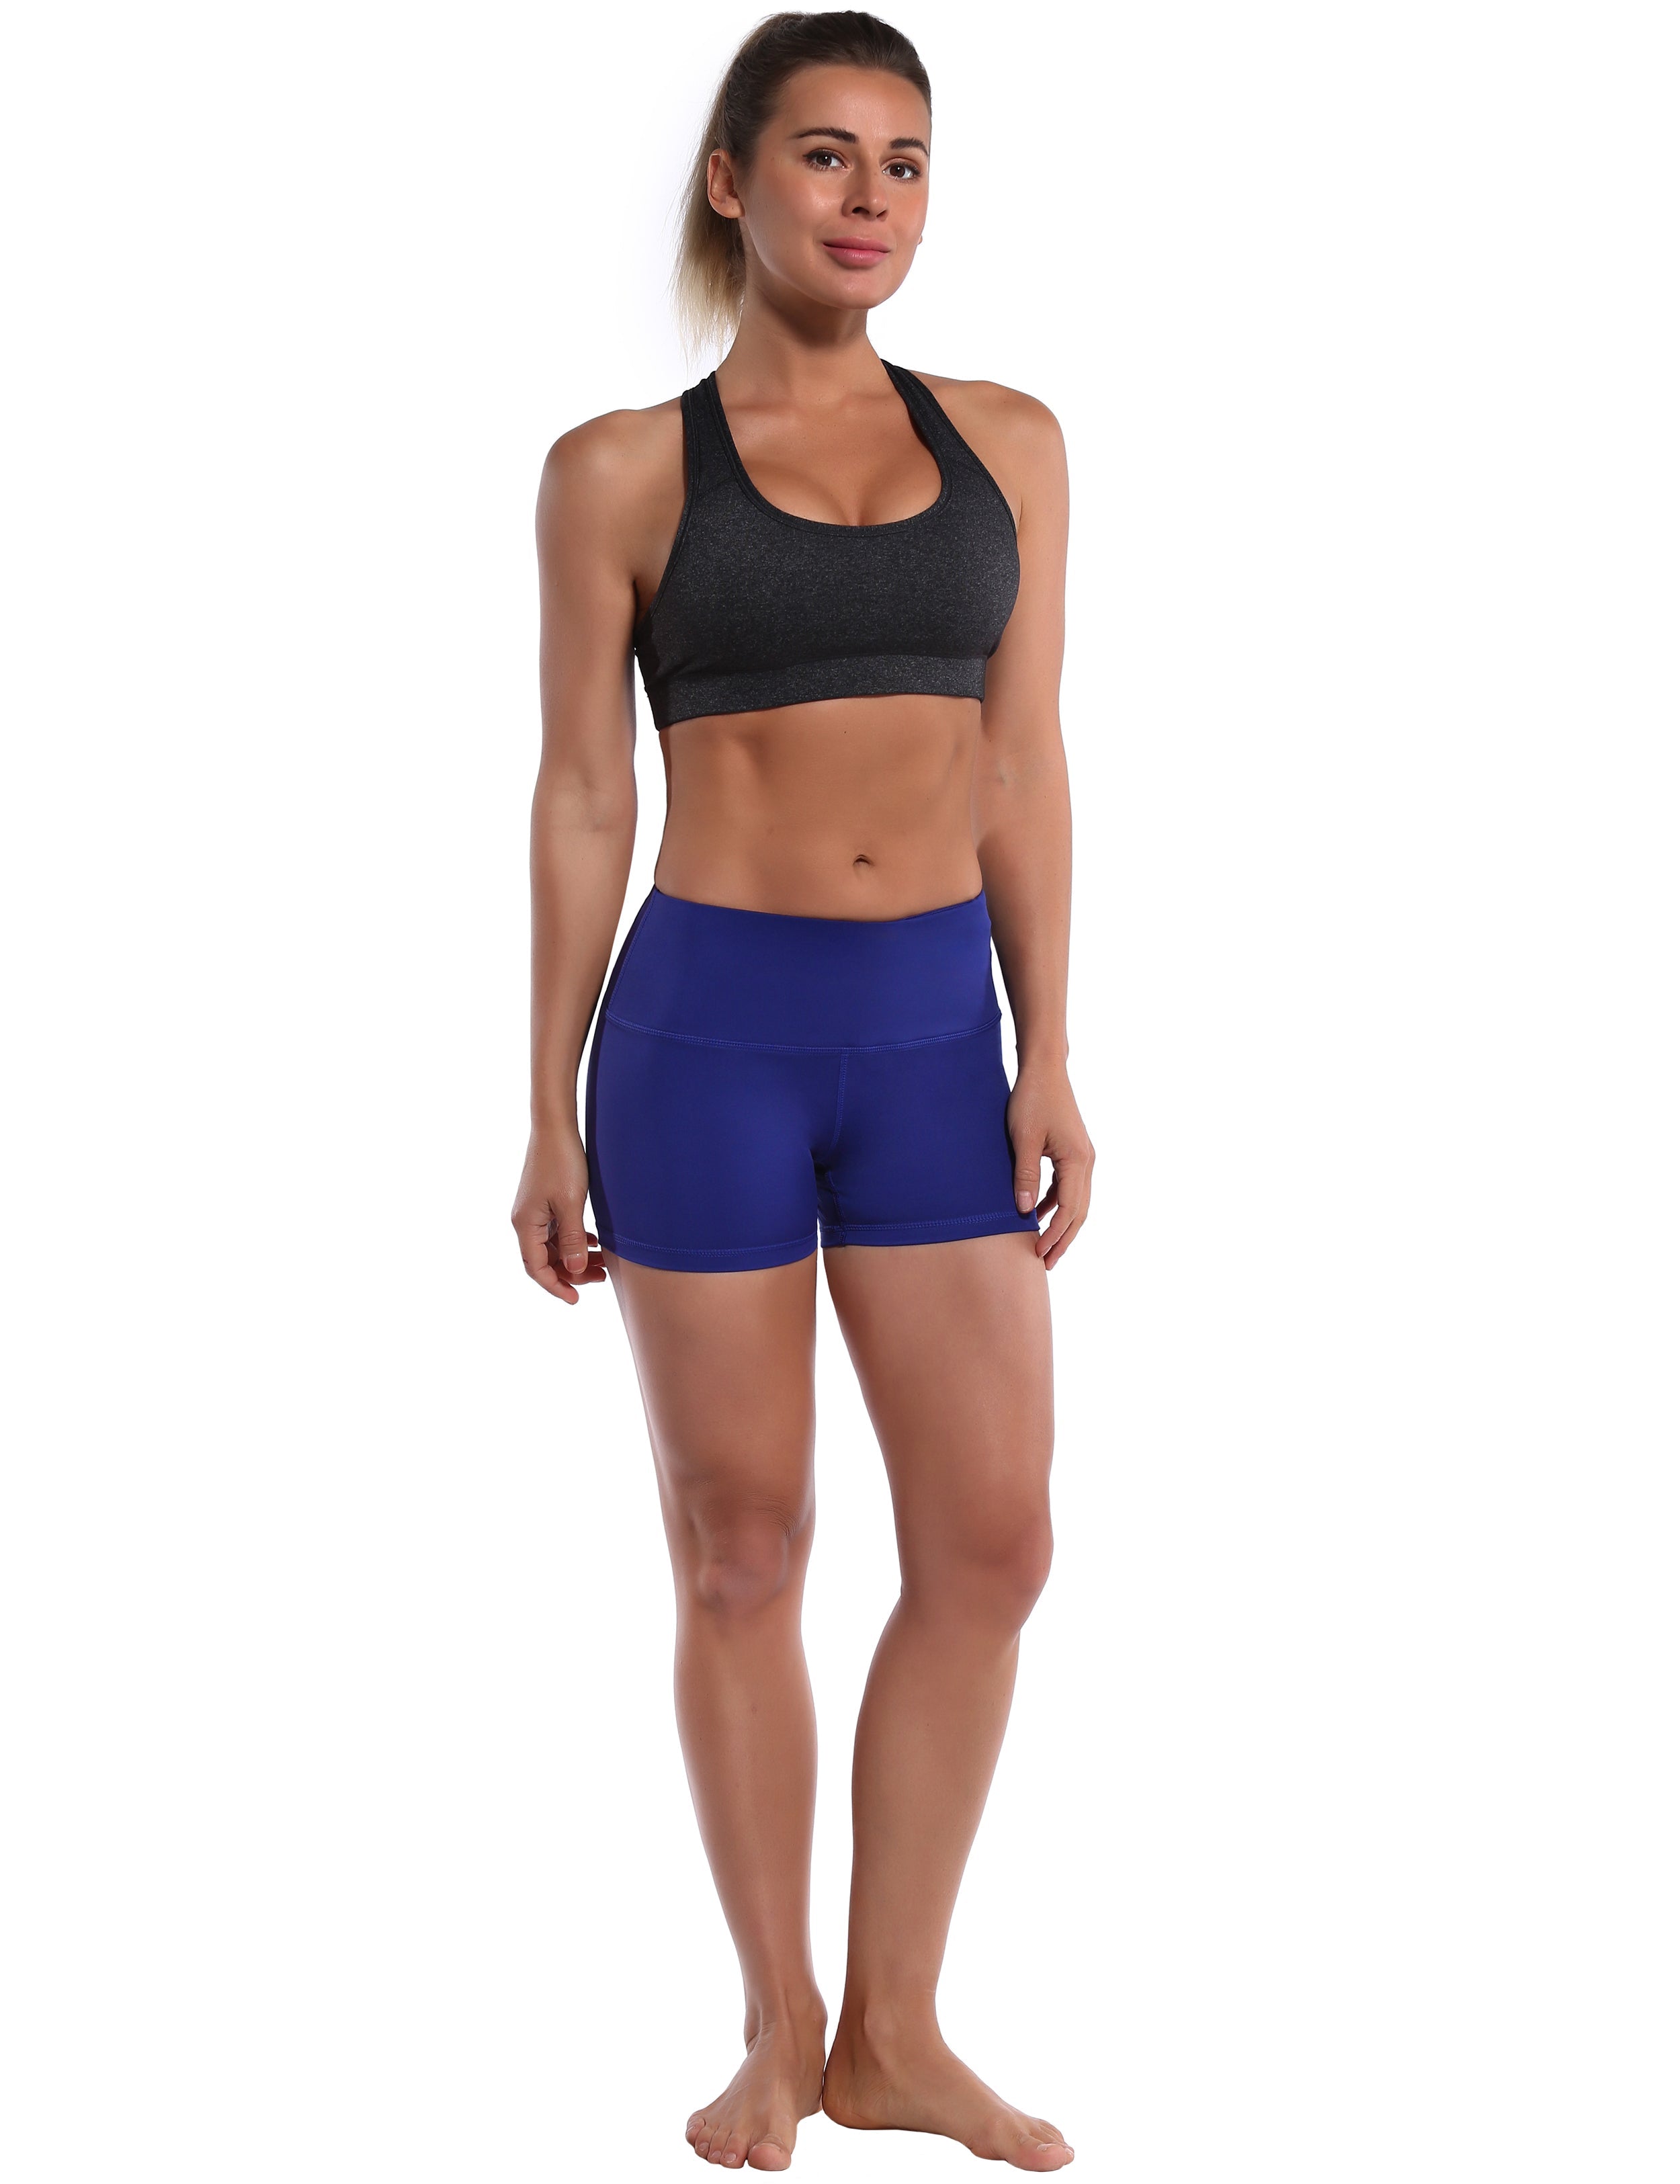 2.5" Biking Shorts navy Softest-ever fabric High elasticity High density 4-way stretch Fabric doesn't attract lint easily No see-through Moisture-wicking Machine wash 75% Nylon, 25% Spandex